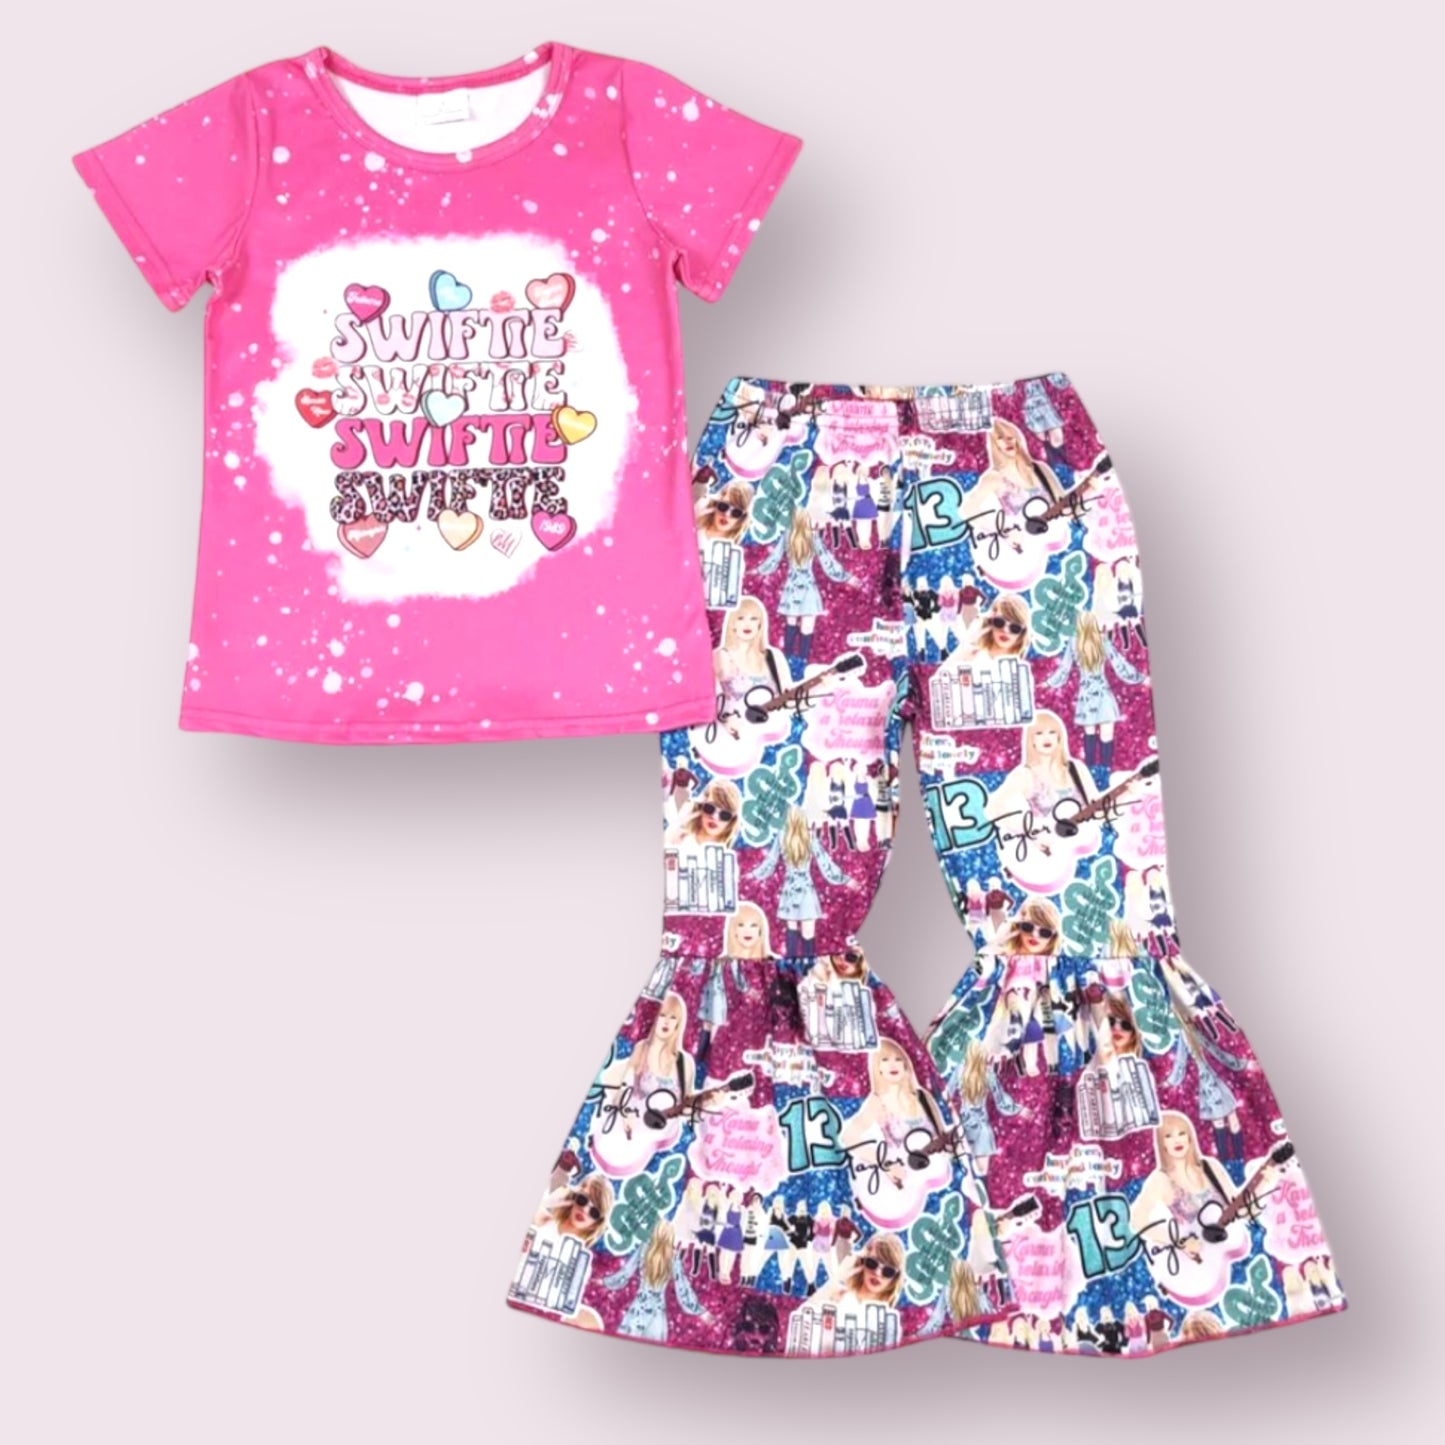 Swiftie Top and Bell Pants